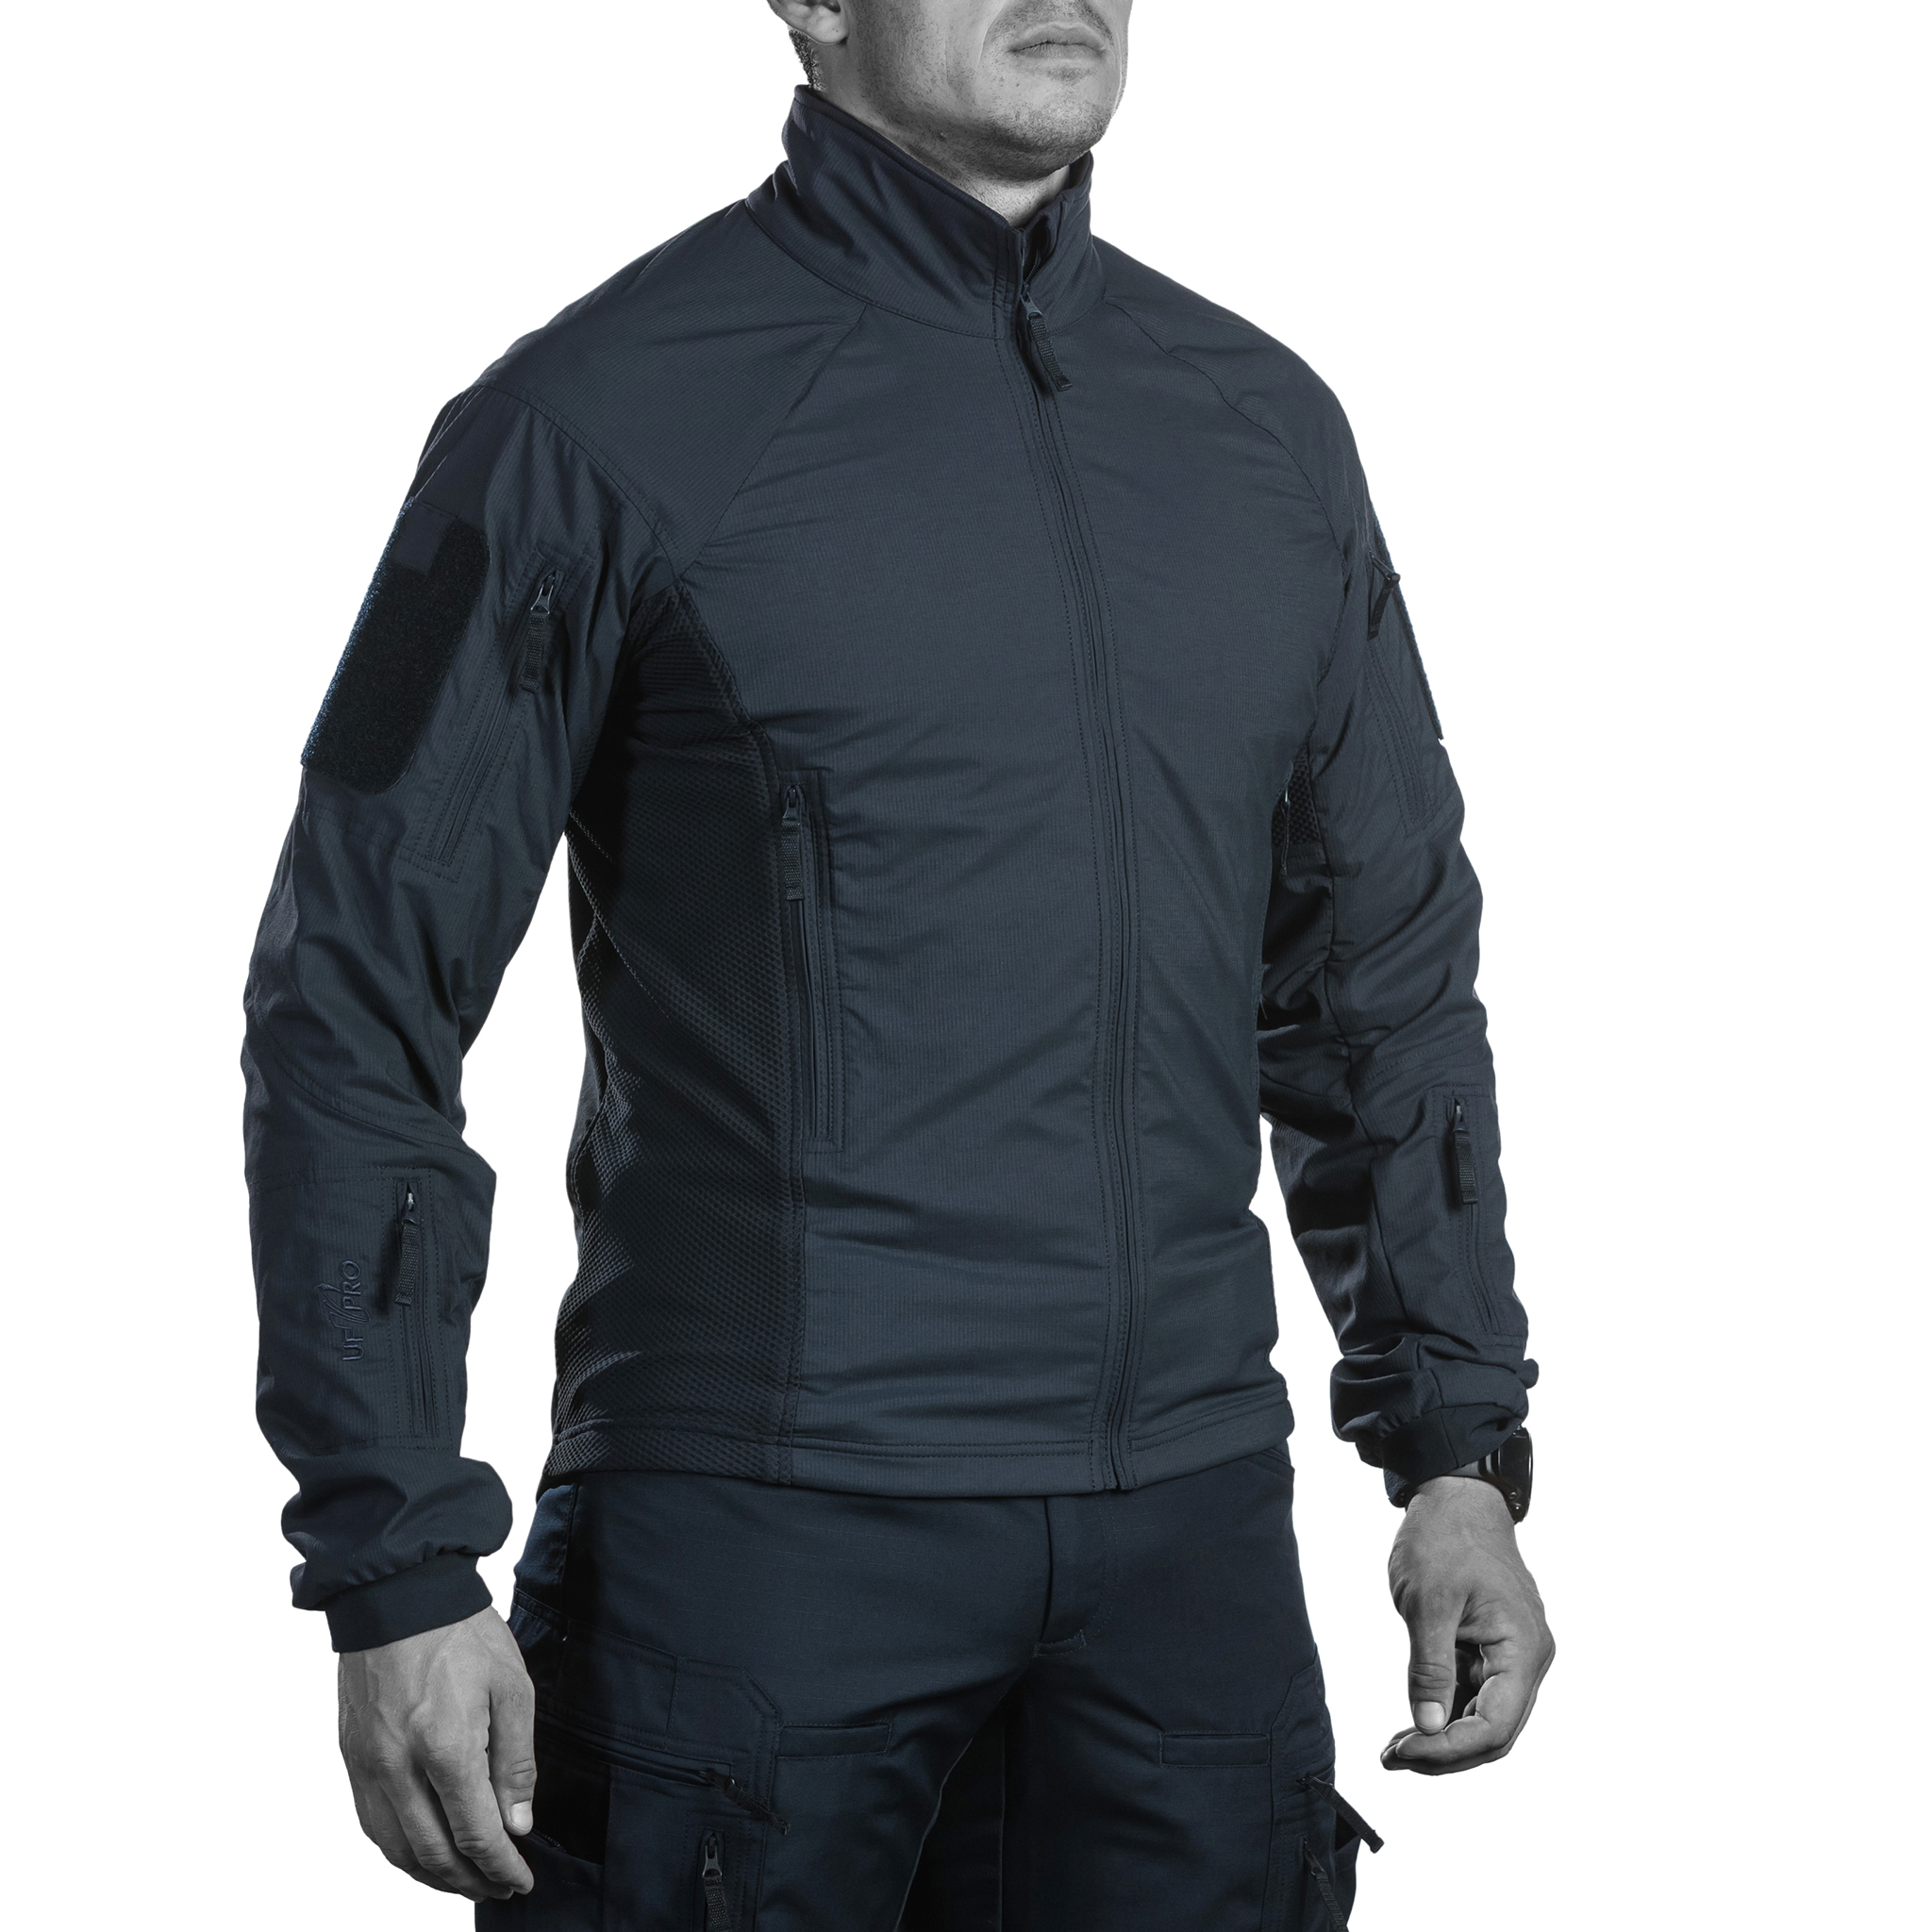 Does the jacket size or "US Size" correspond to the sizing on UF Pro's website?